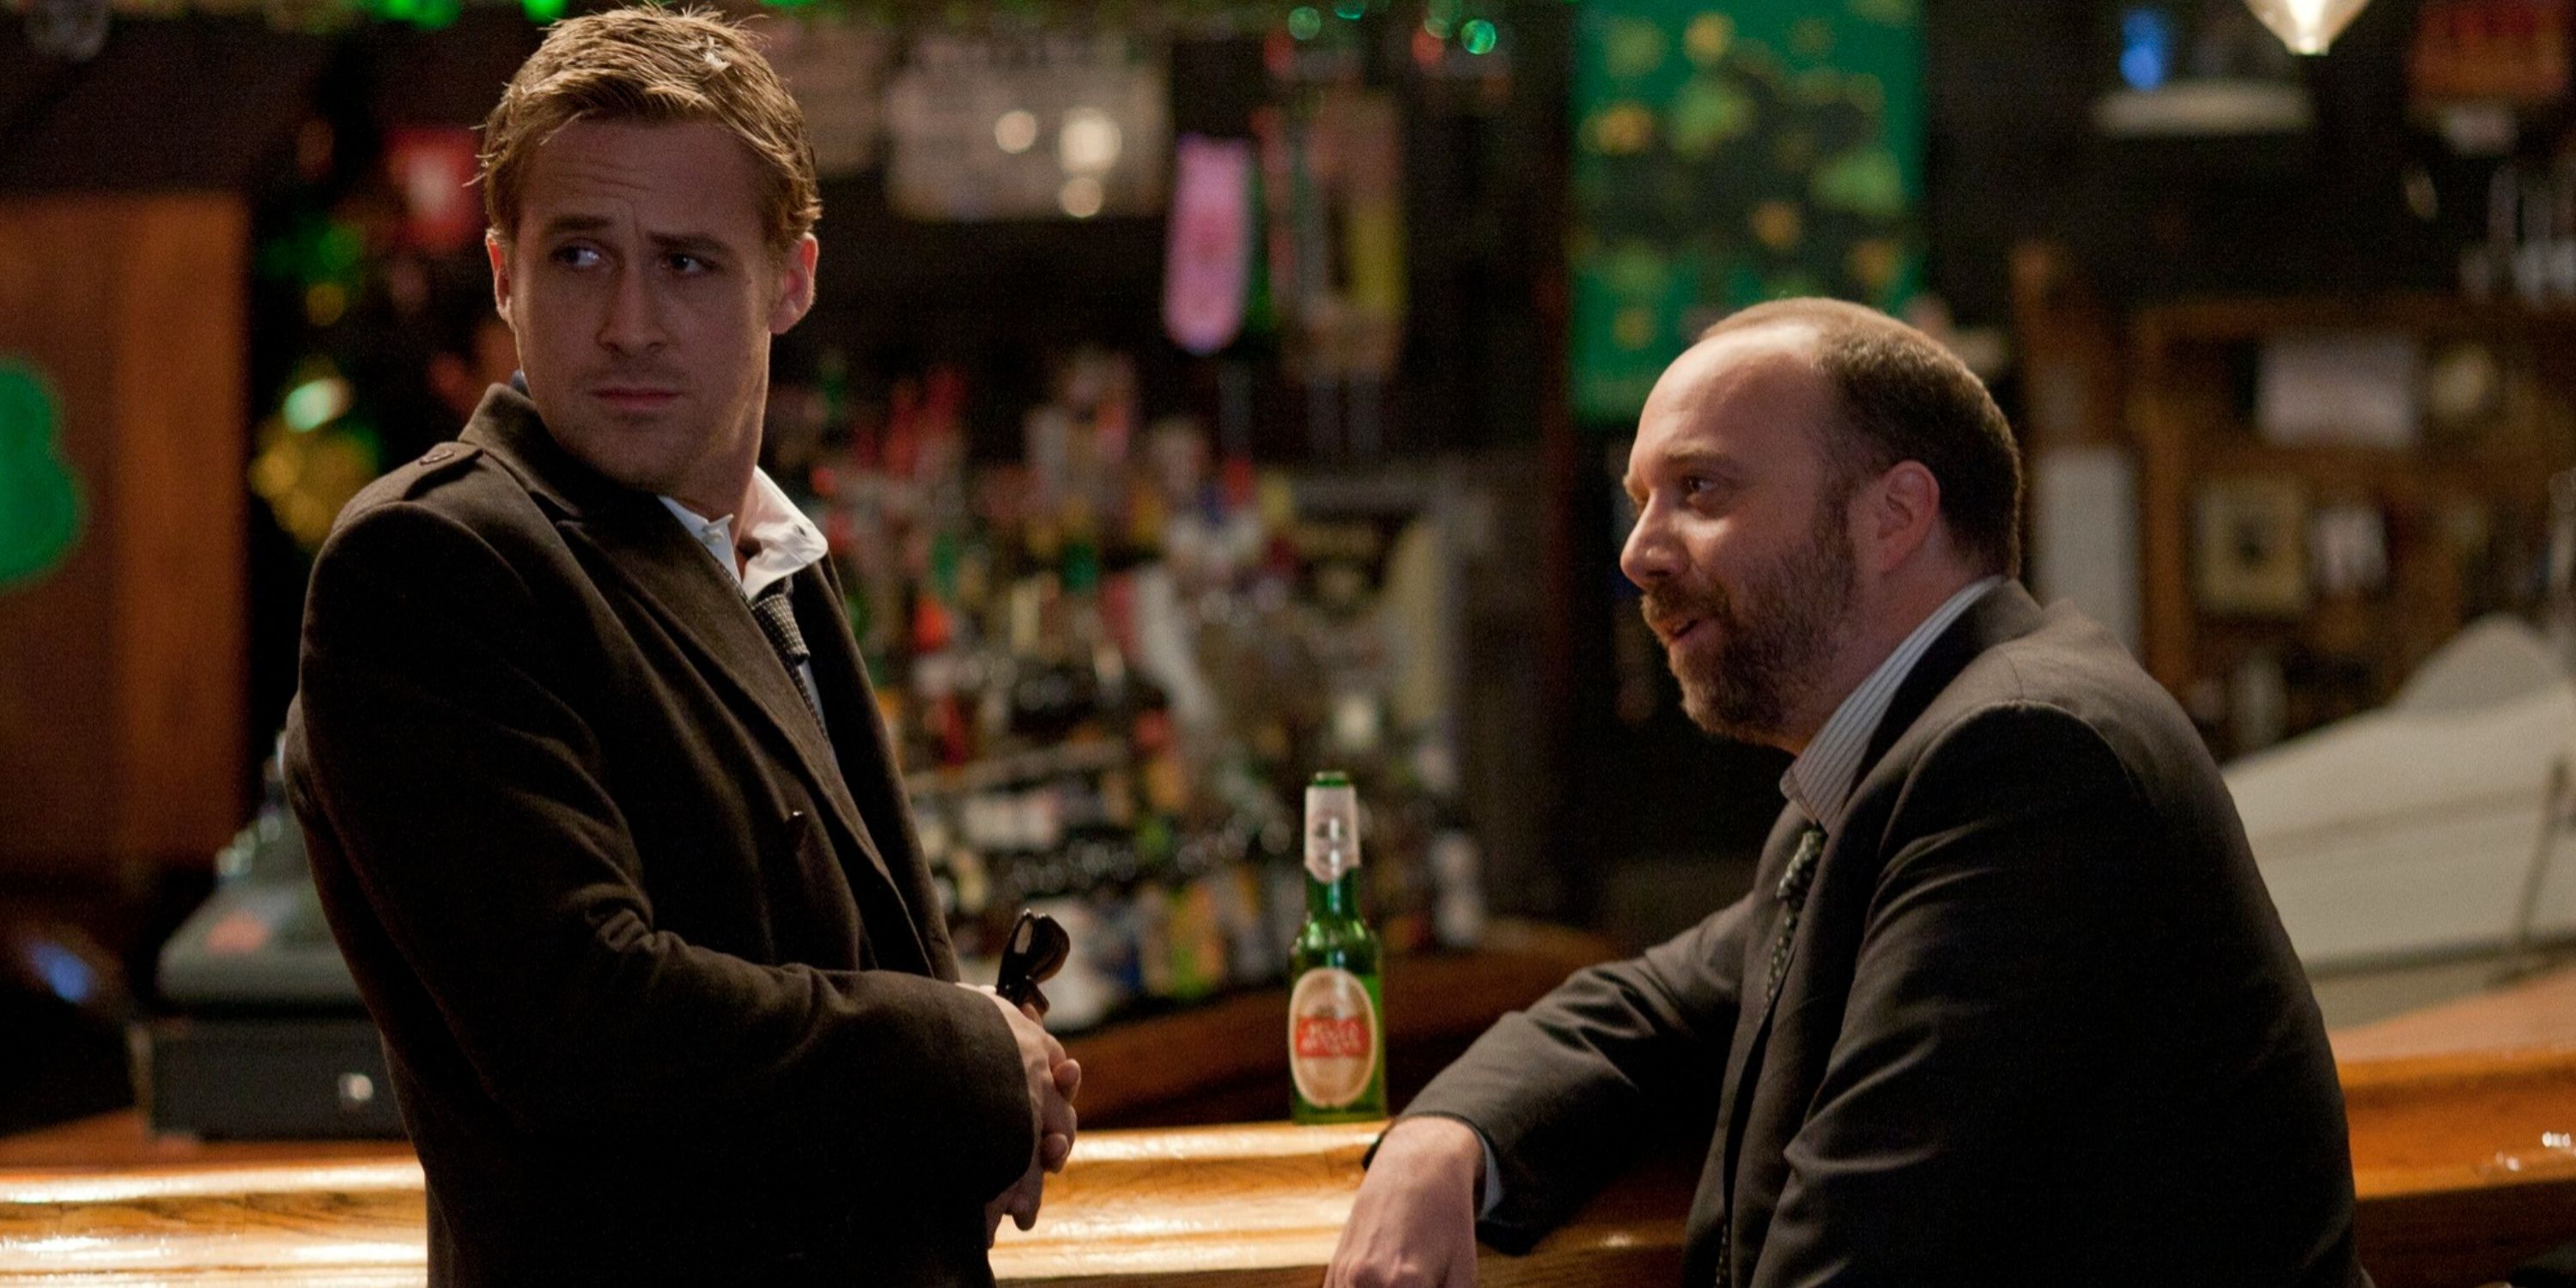 Ryan Gosling and Paul Giamatti in The Ides of March